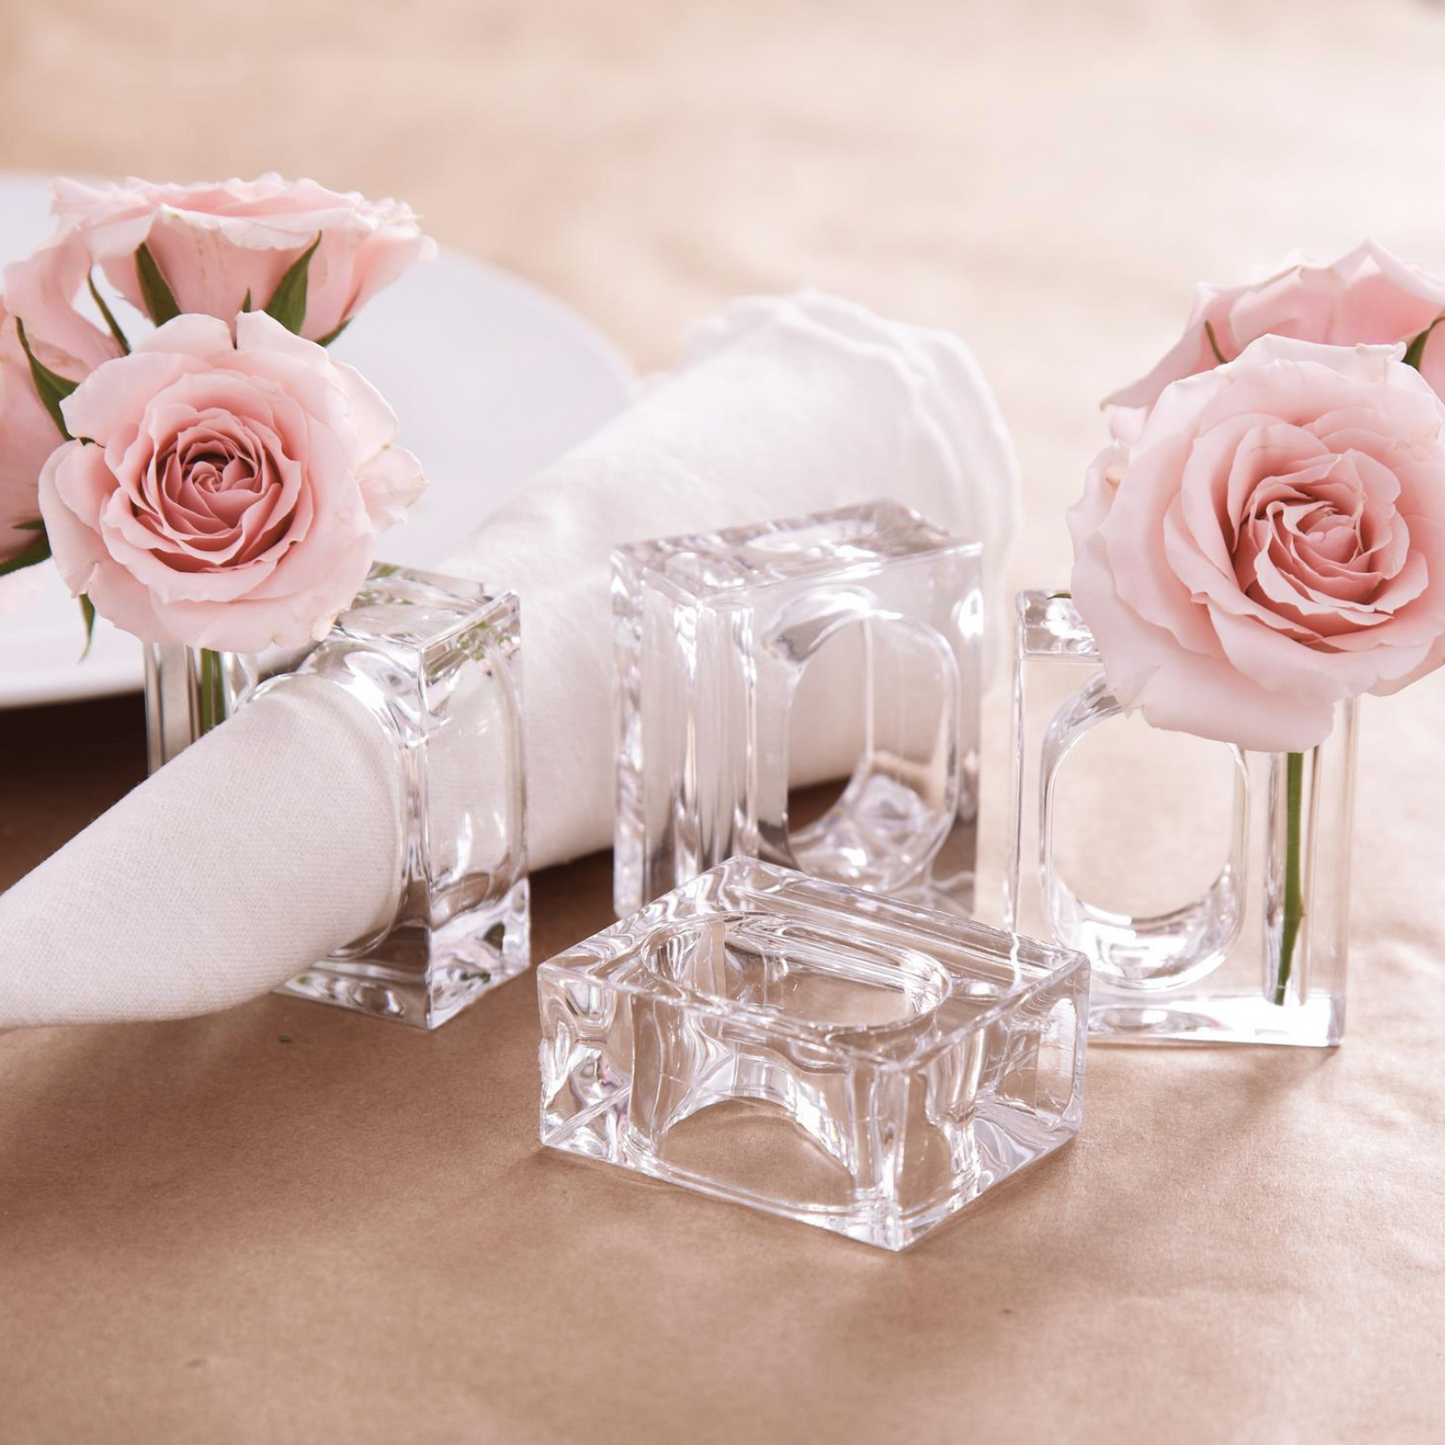 Acrylic Napkin Rings with Flower Holders